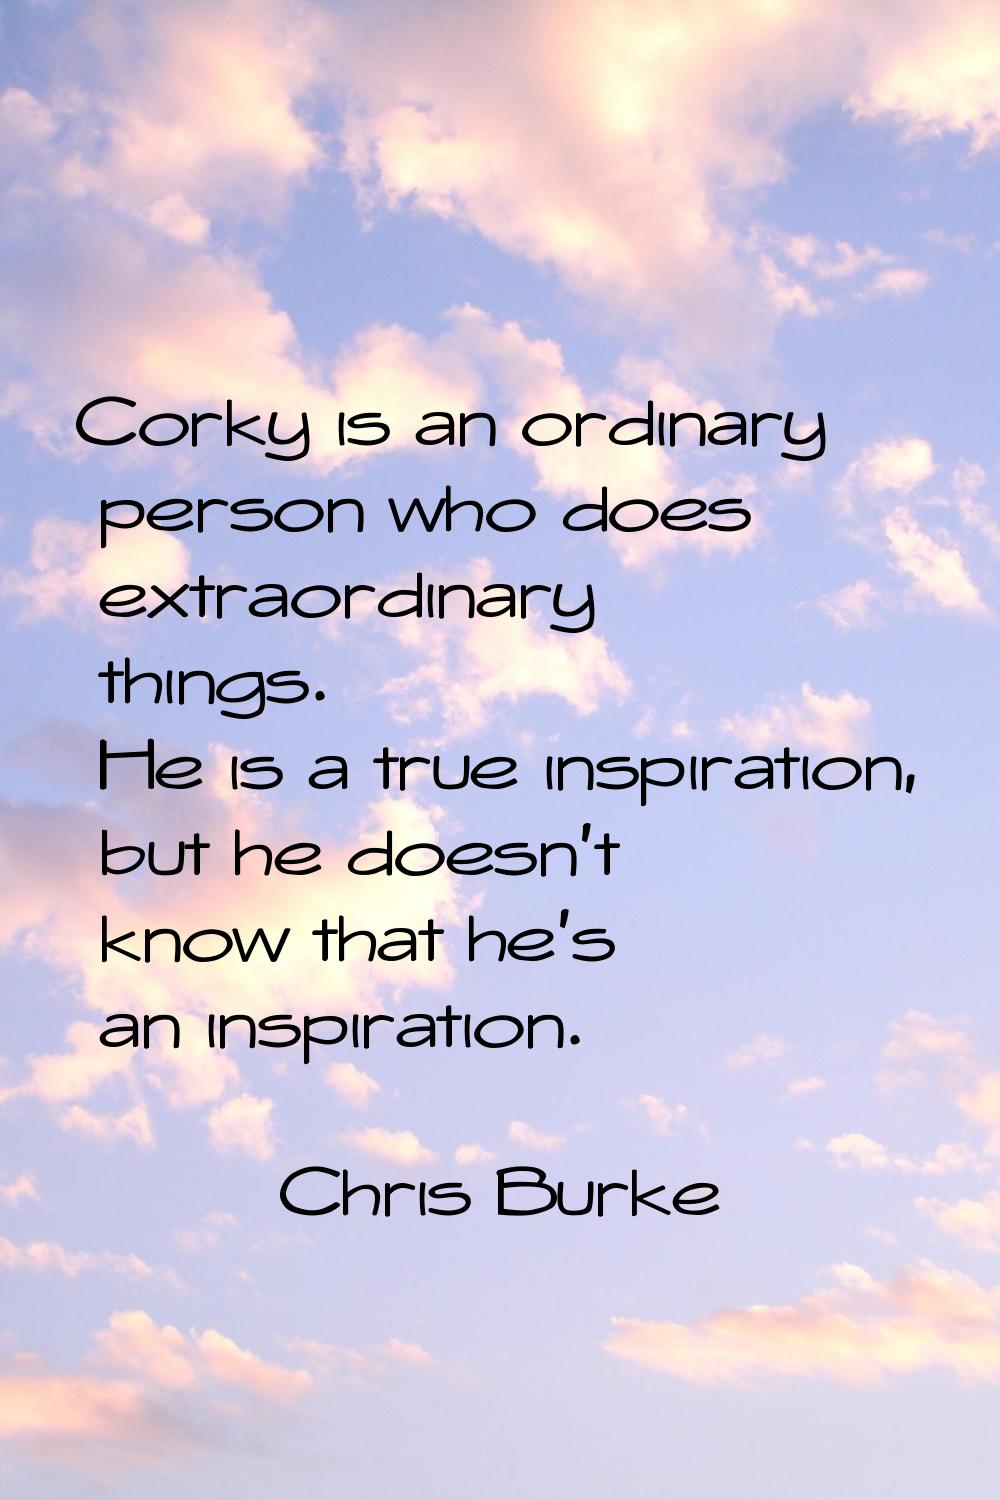 Corky is an ordinary person who does extraordinary things. He is a true inspiration, but he doesn't